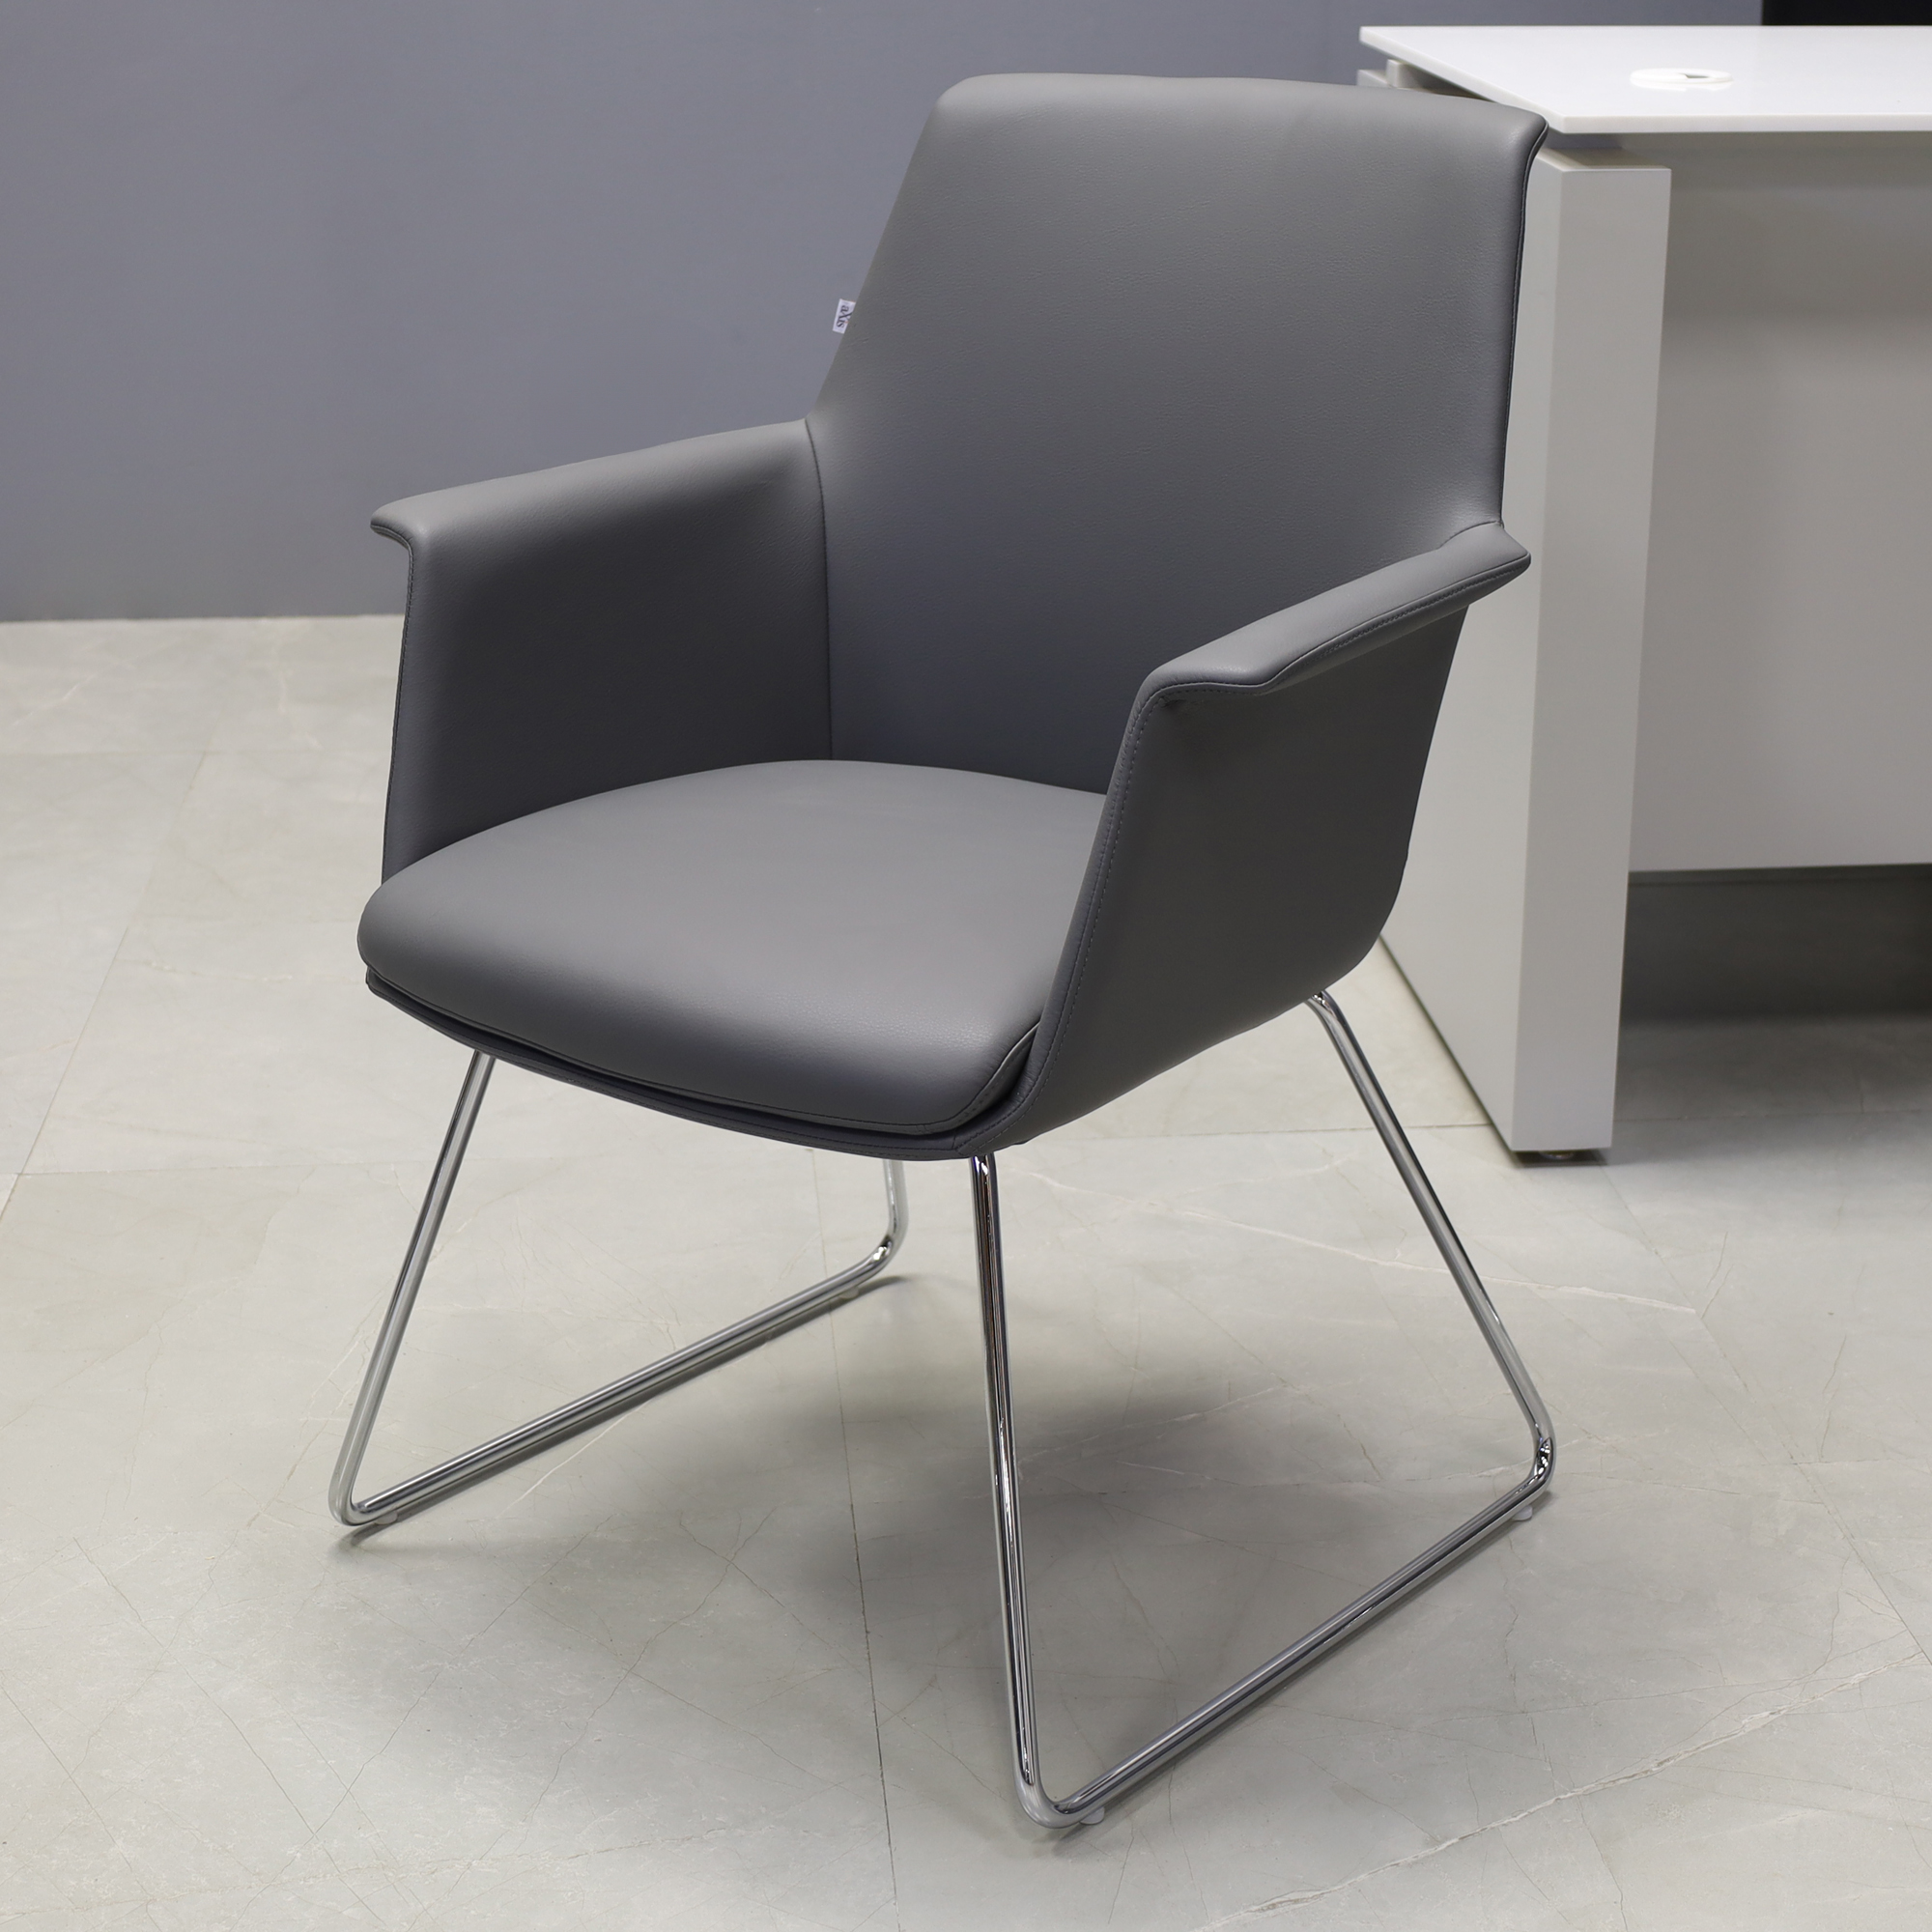 Archi Guest Chair in gray upholstery, shown here.